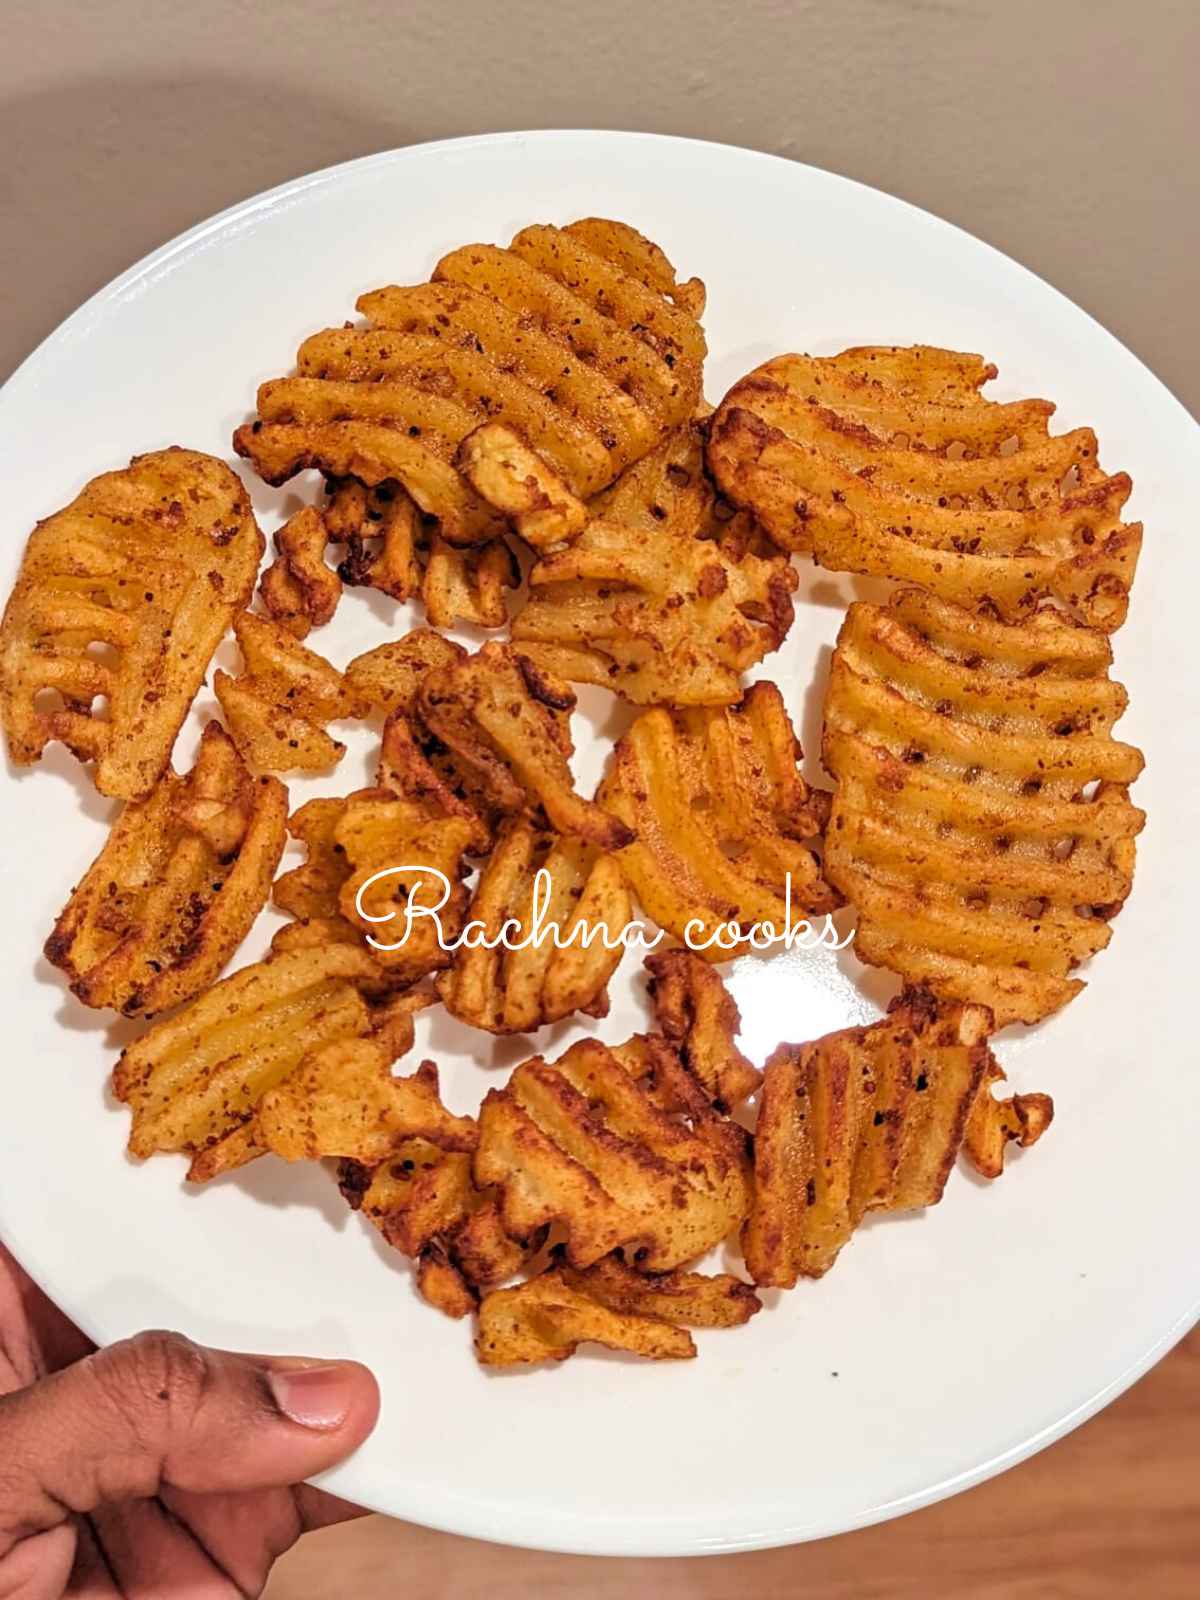 Golden waffle fries after air frying served on a white plate.